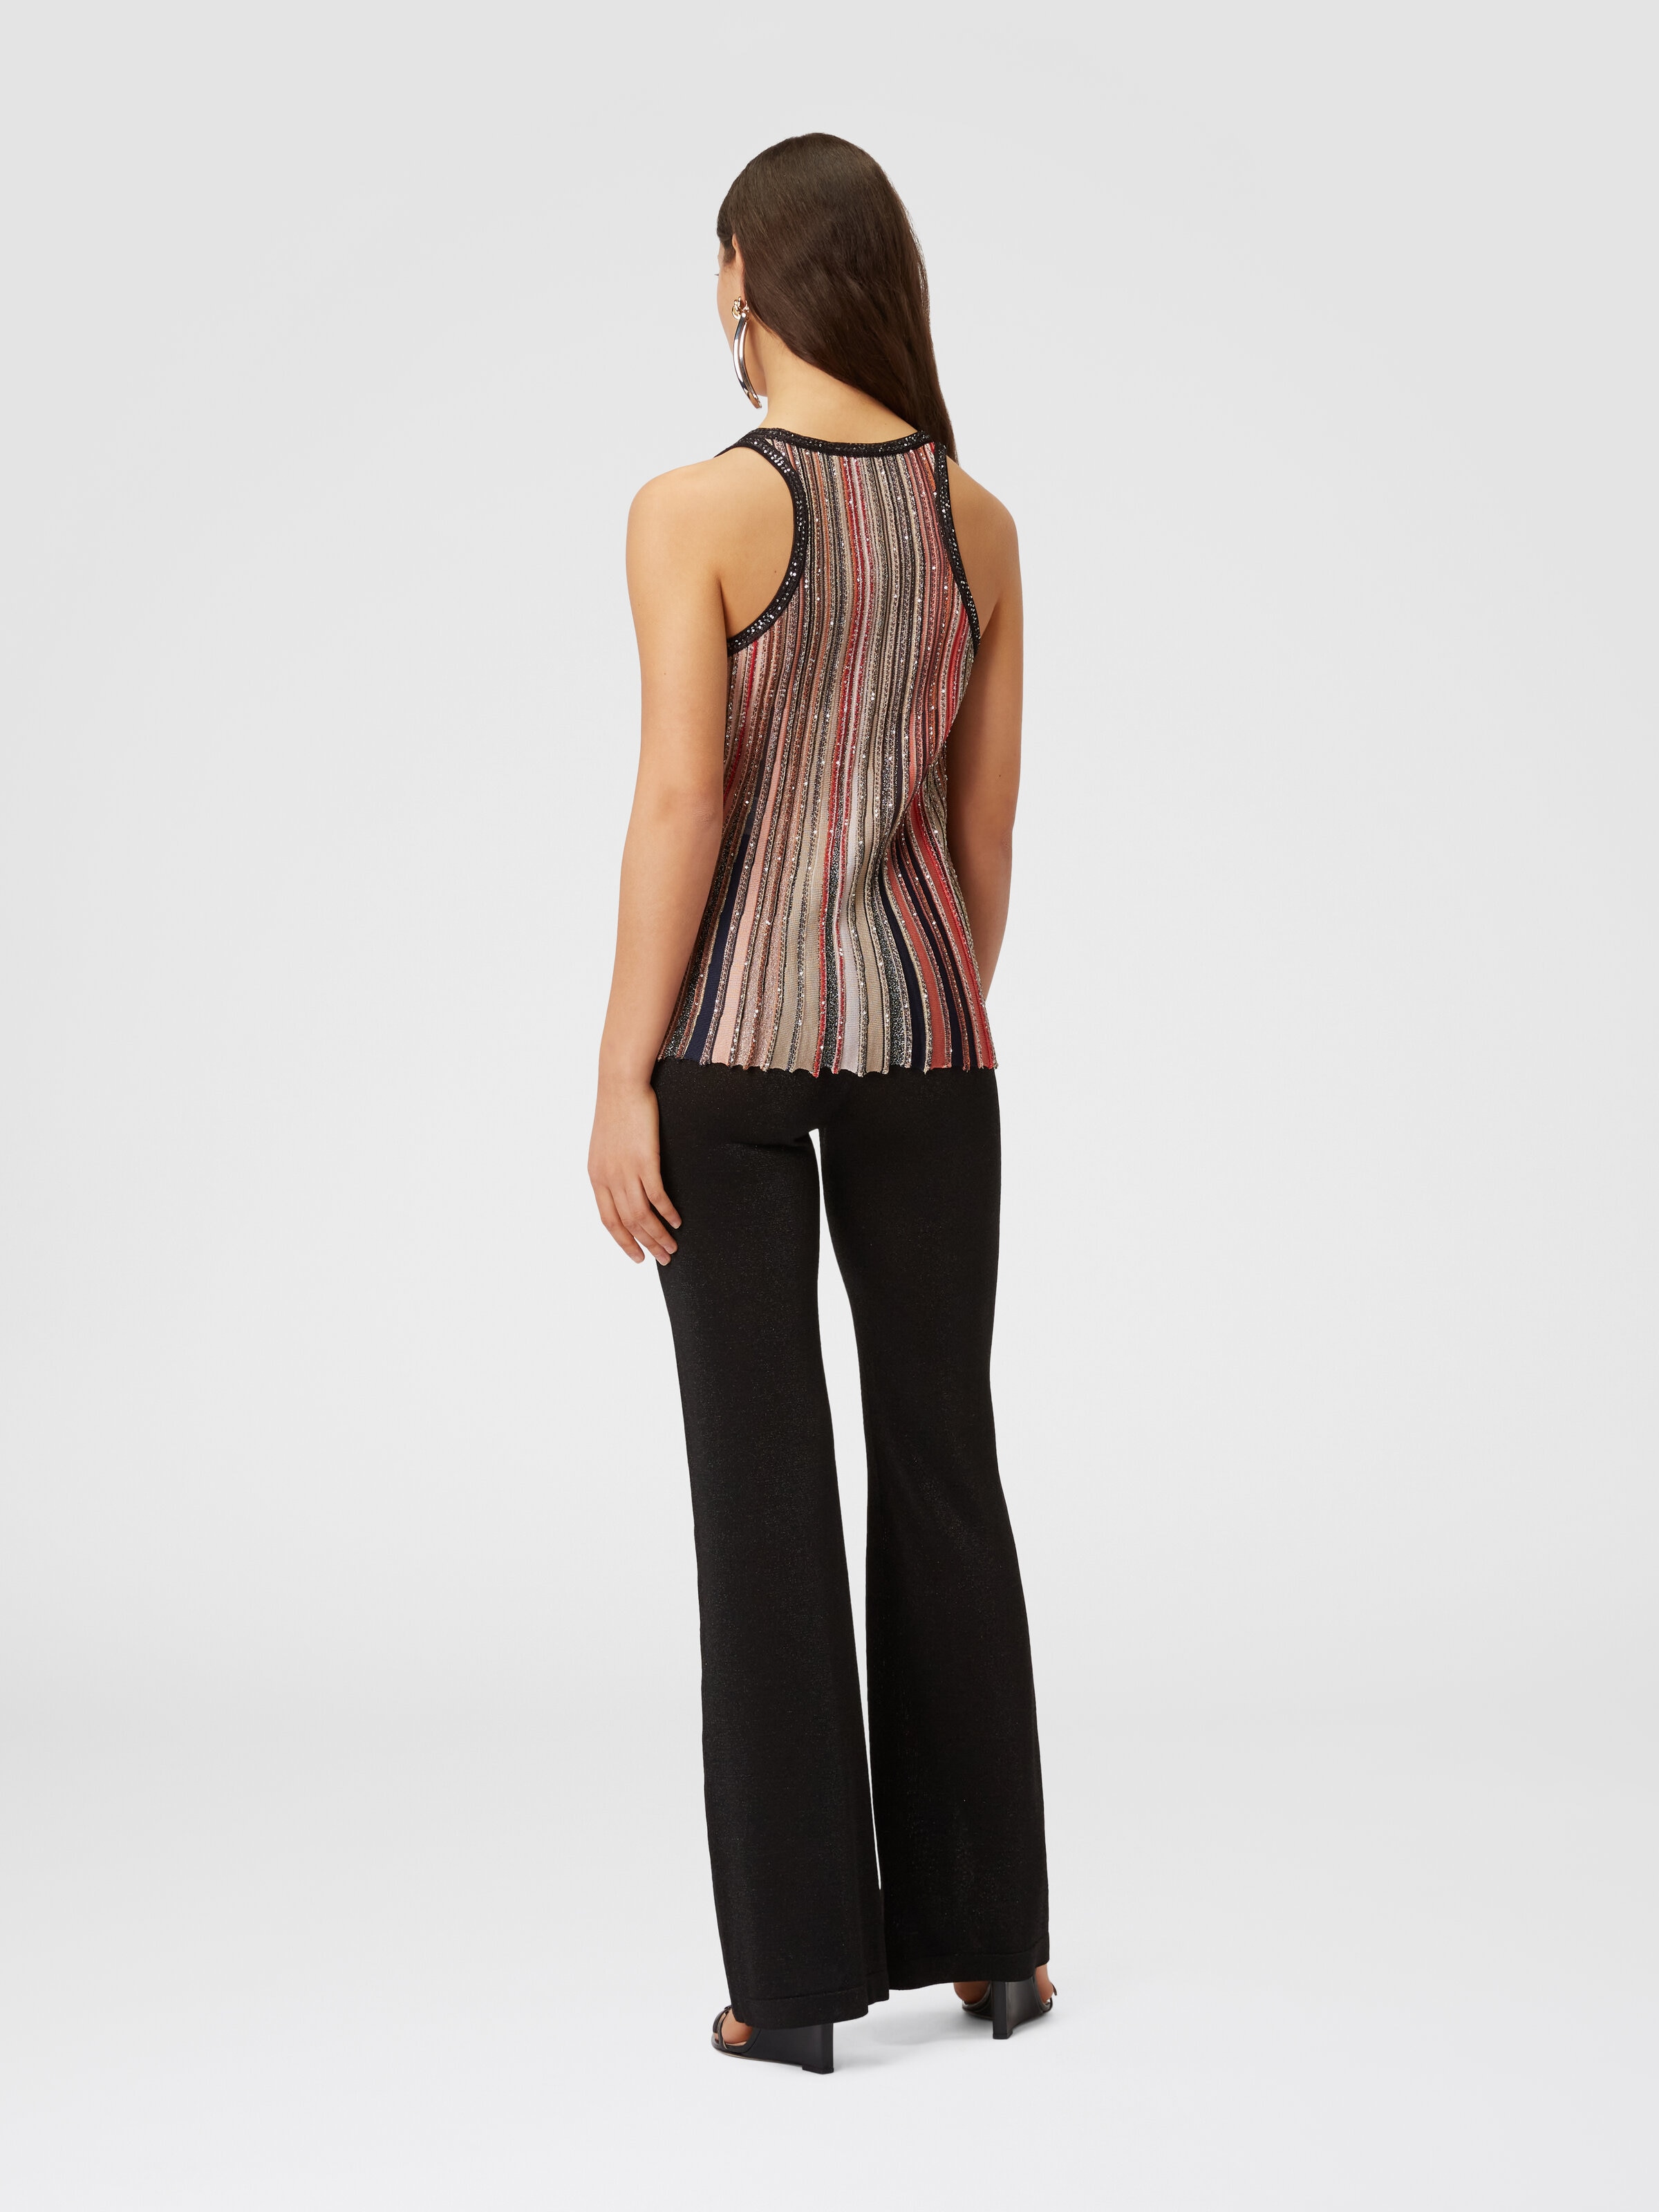 Tank top in vertical striped knit with sequins , Multicoloured  - 2